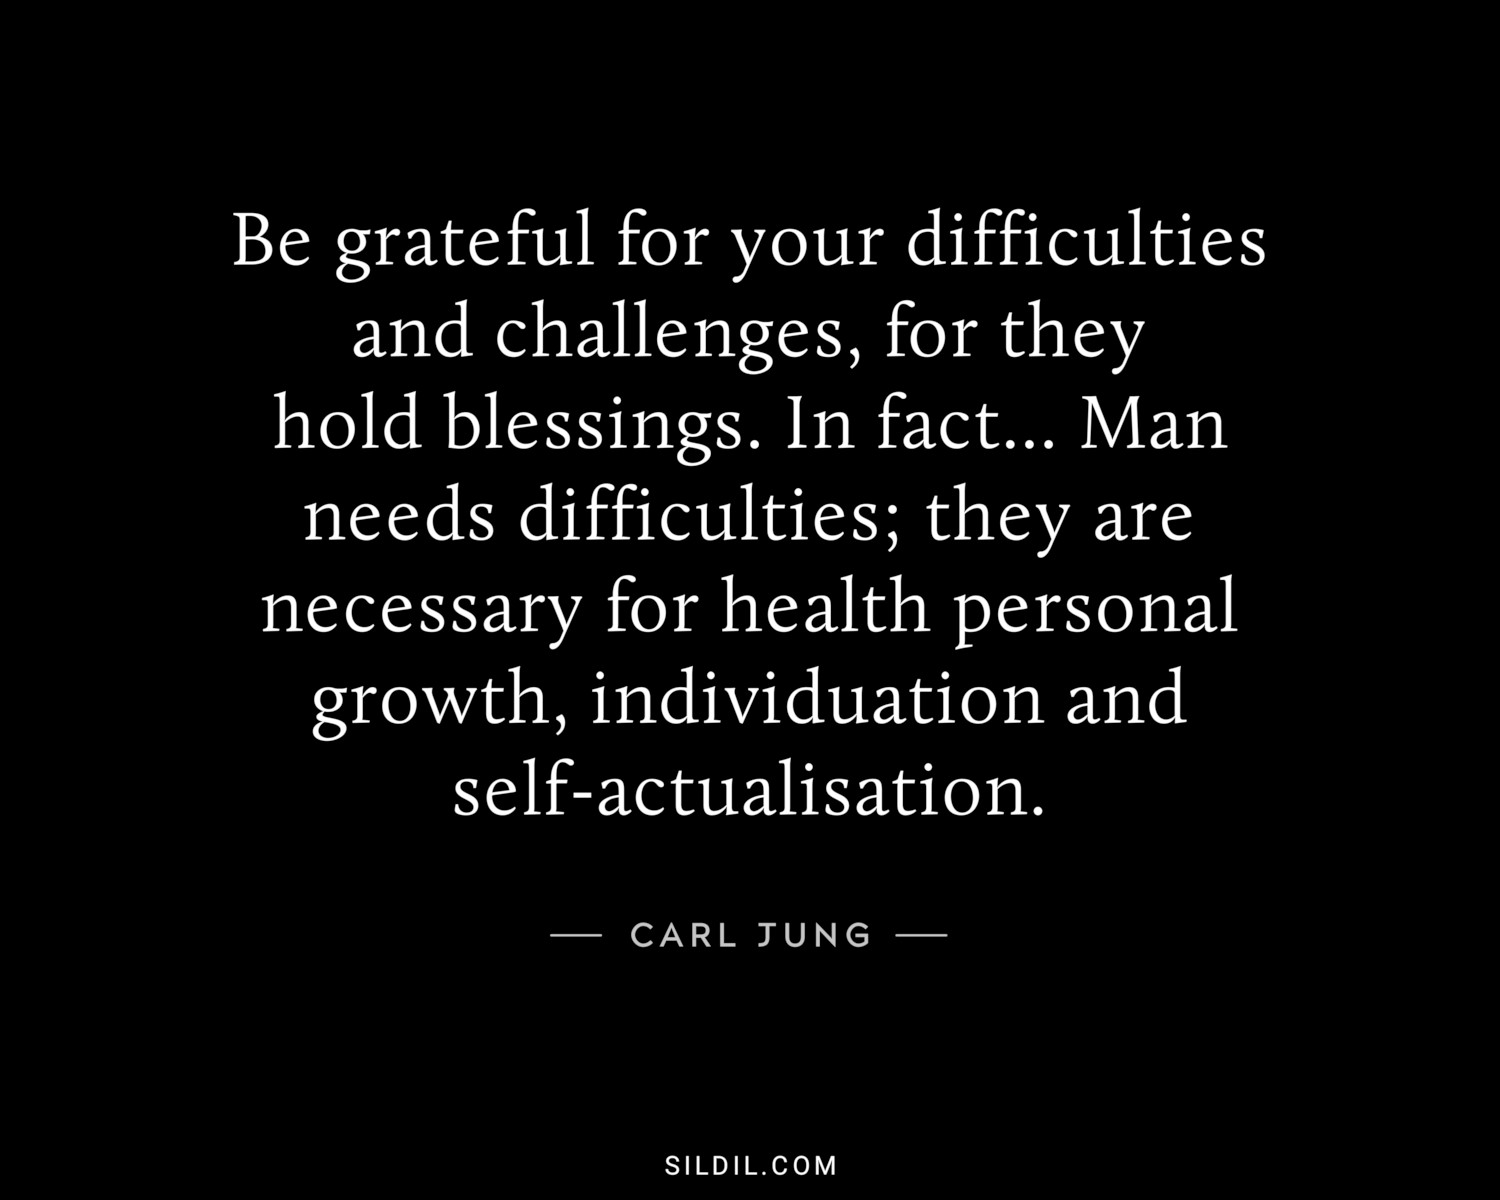 Be grateful for your difficulties and challenges, for they hold blessings. In fact... Man needs difficulties; they are necessary for health personal growth, individuation and self-actualisation.